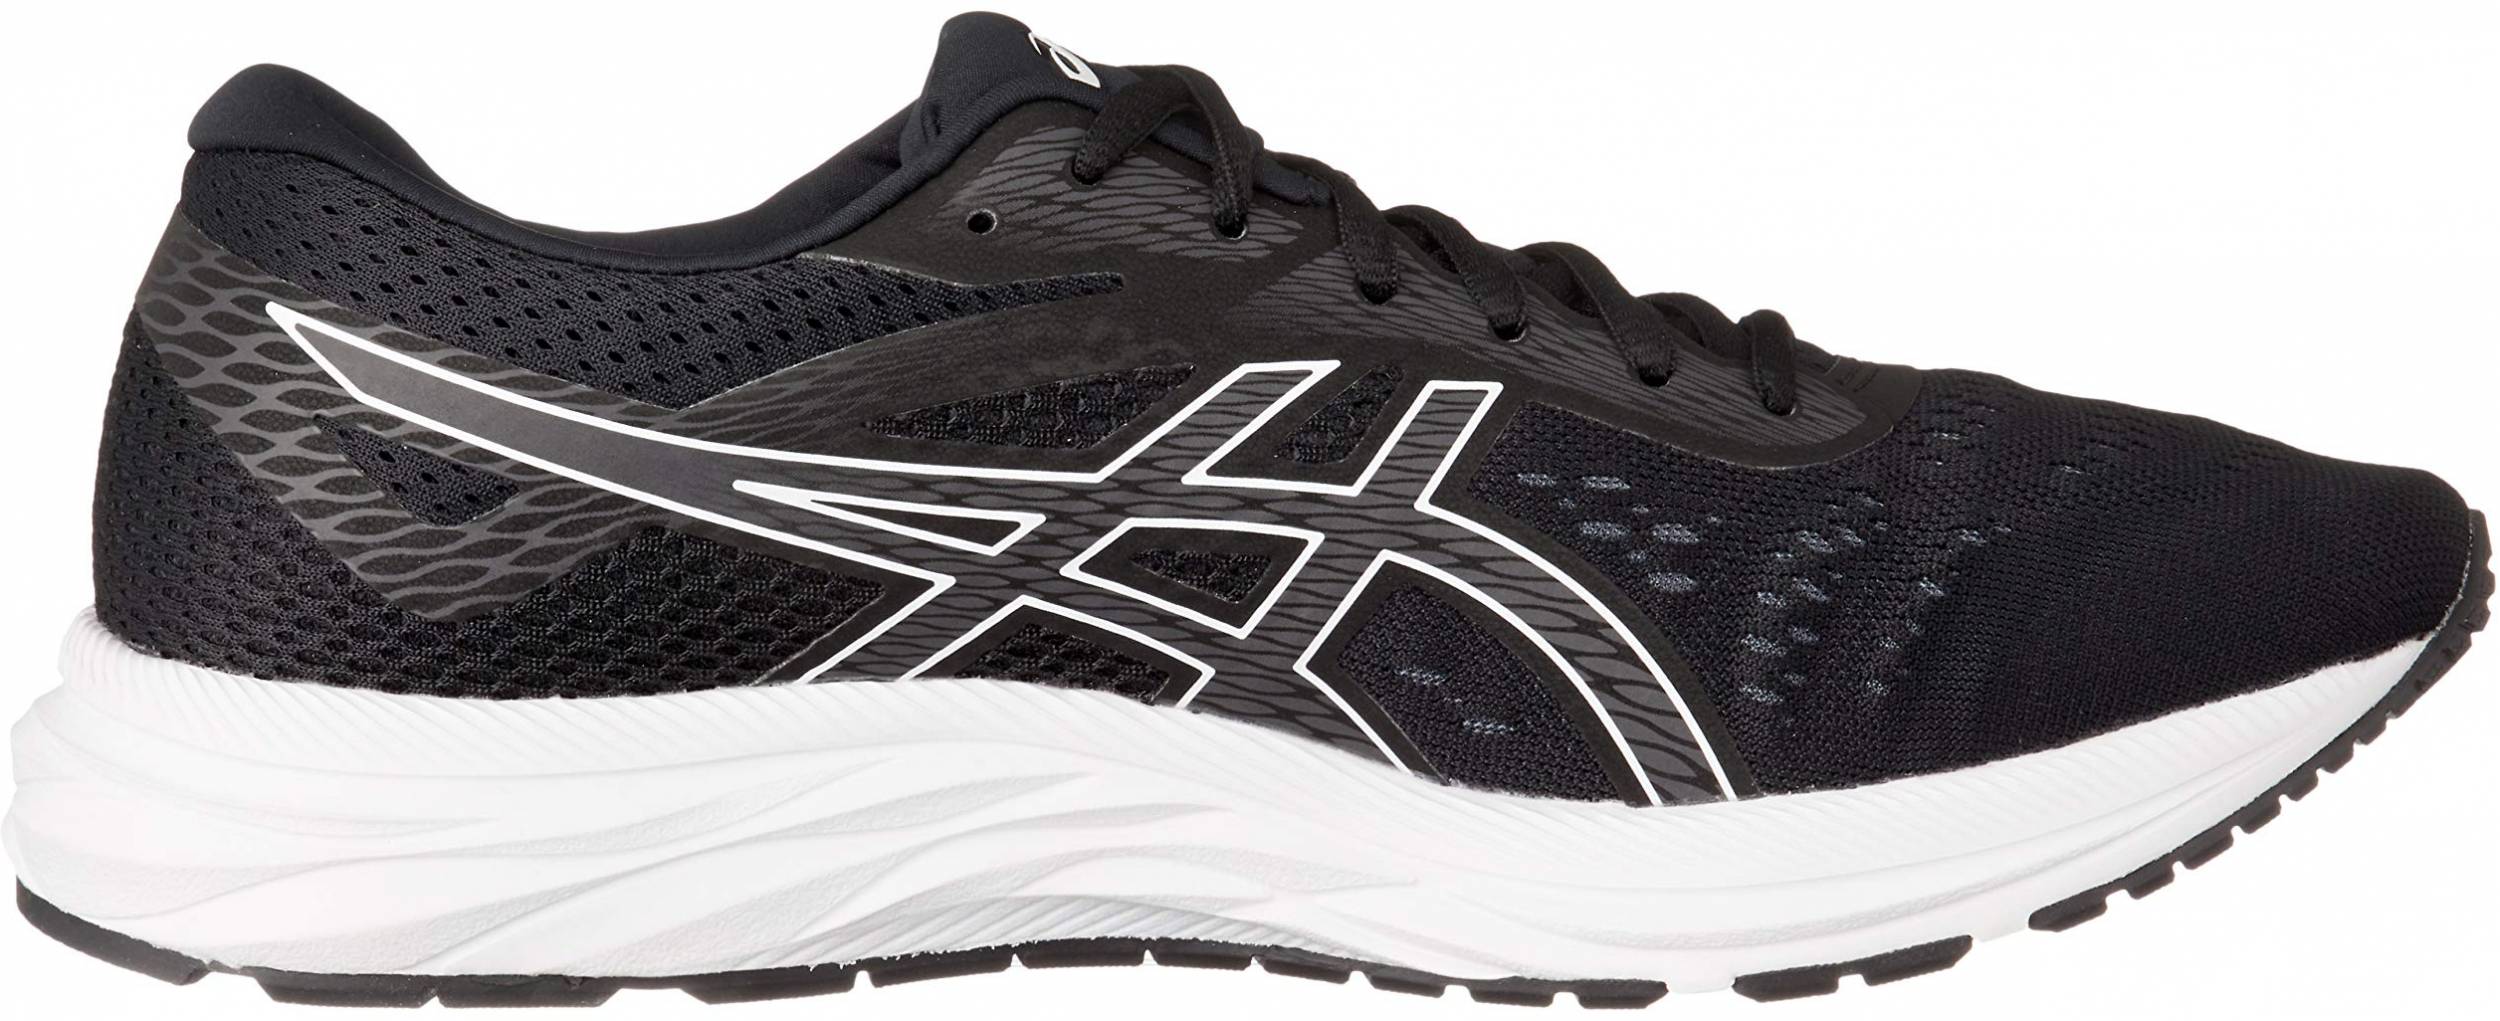 Only $38 + Review of Asics Gel Excite 6 